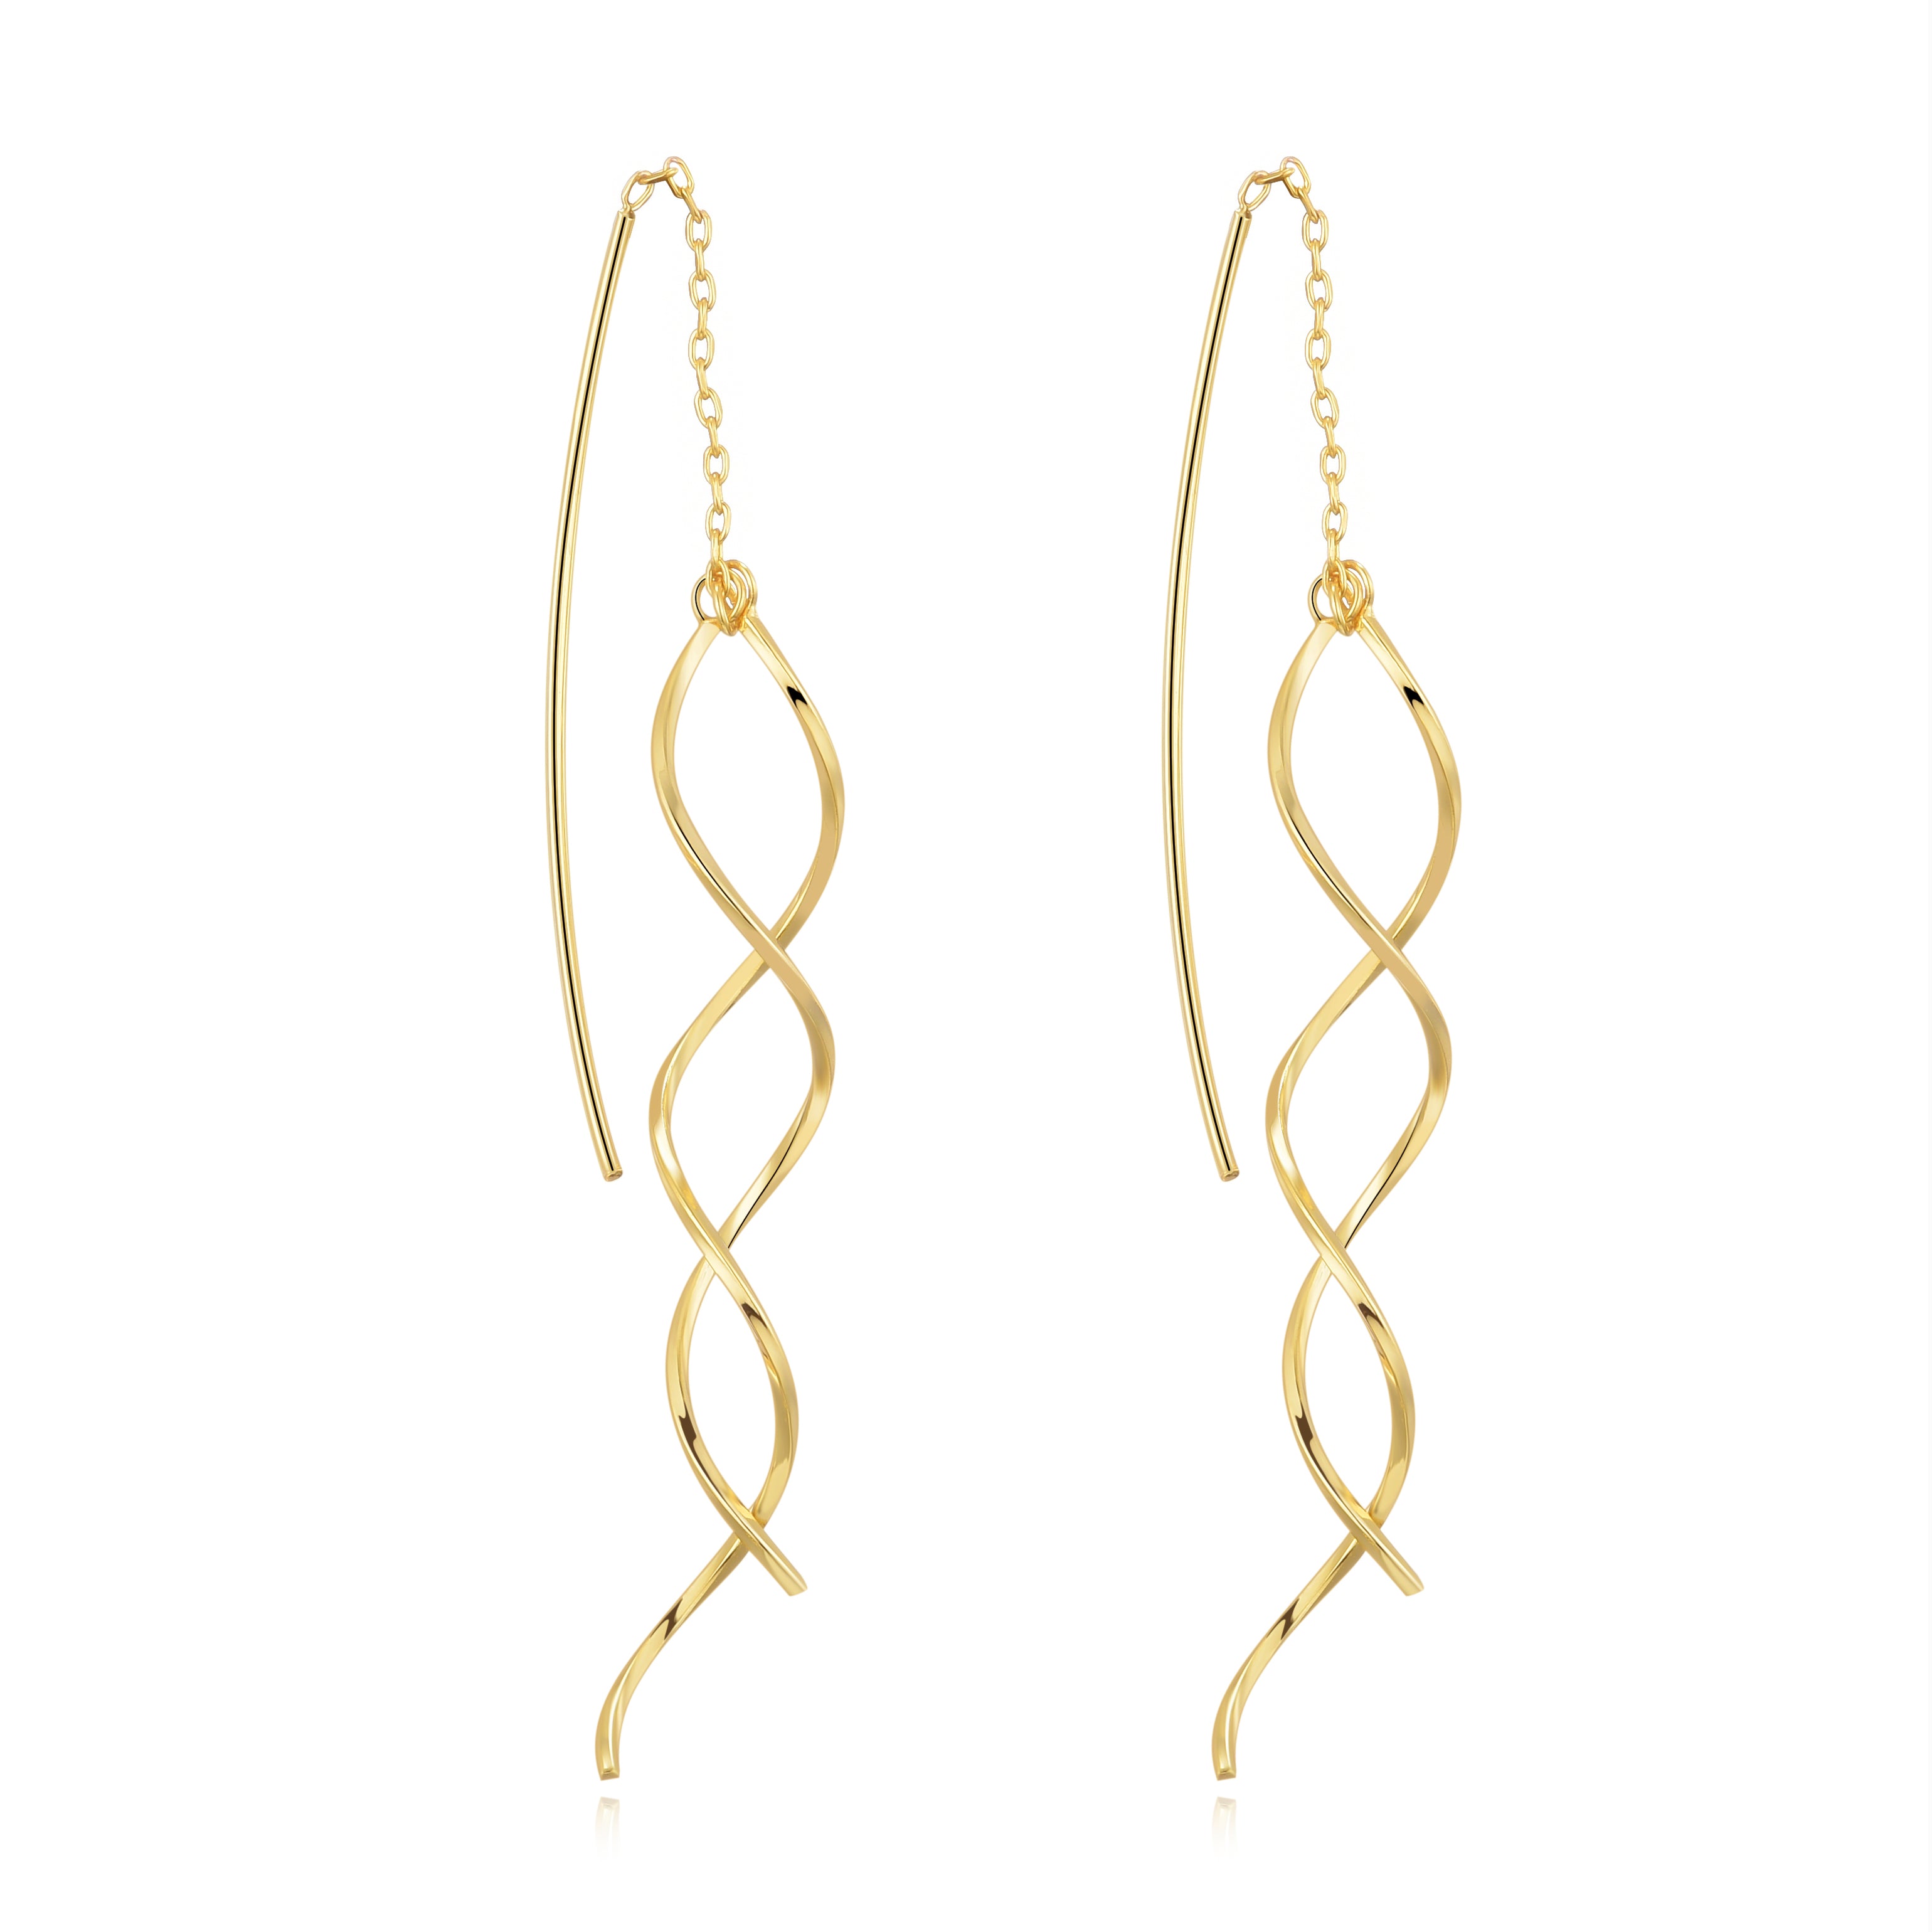 Gold Plated Spiral Thread Earrings by Philip Jones Jewellery